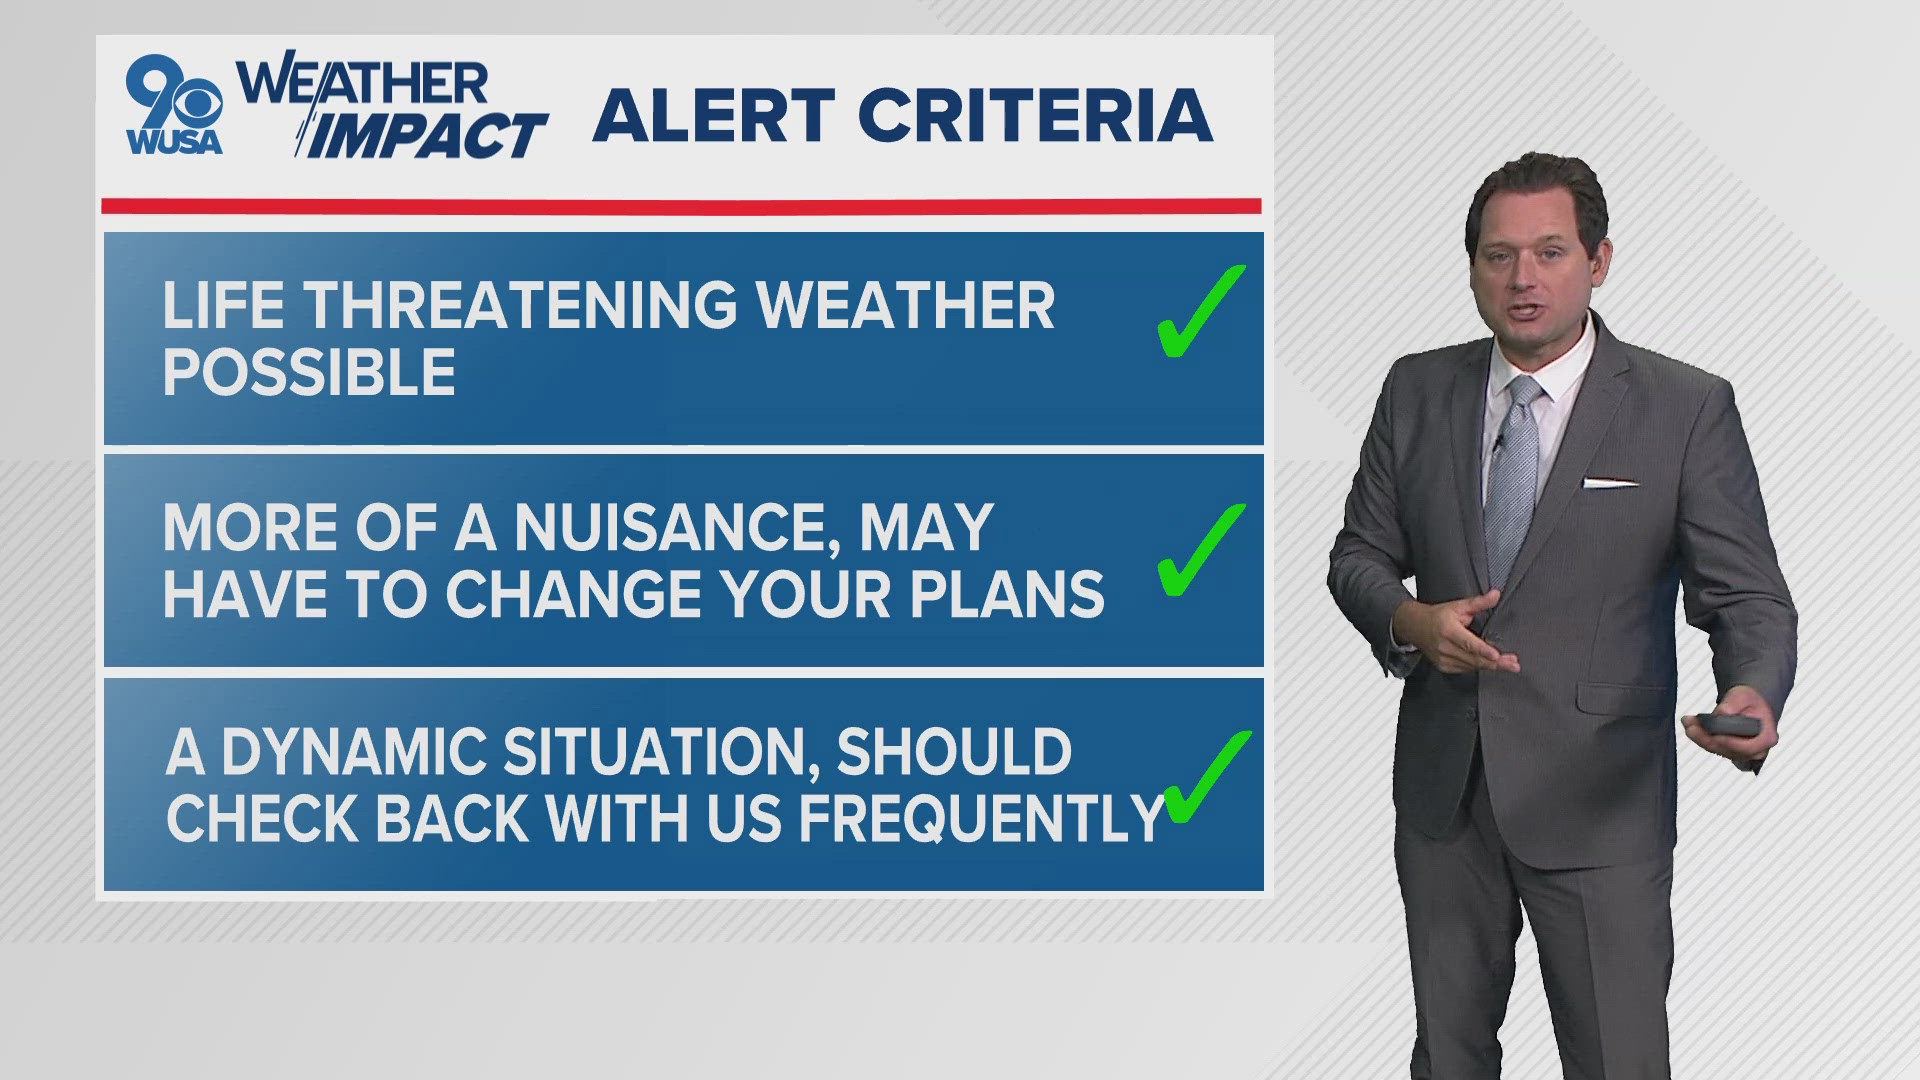 We will issue Weather Impact Alerts to let you know when weather conditions will affect you, how it will impact your life and the tips you need to stay safe.